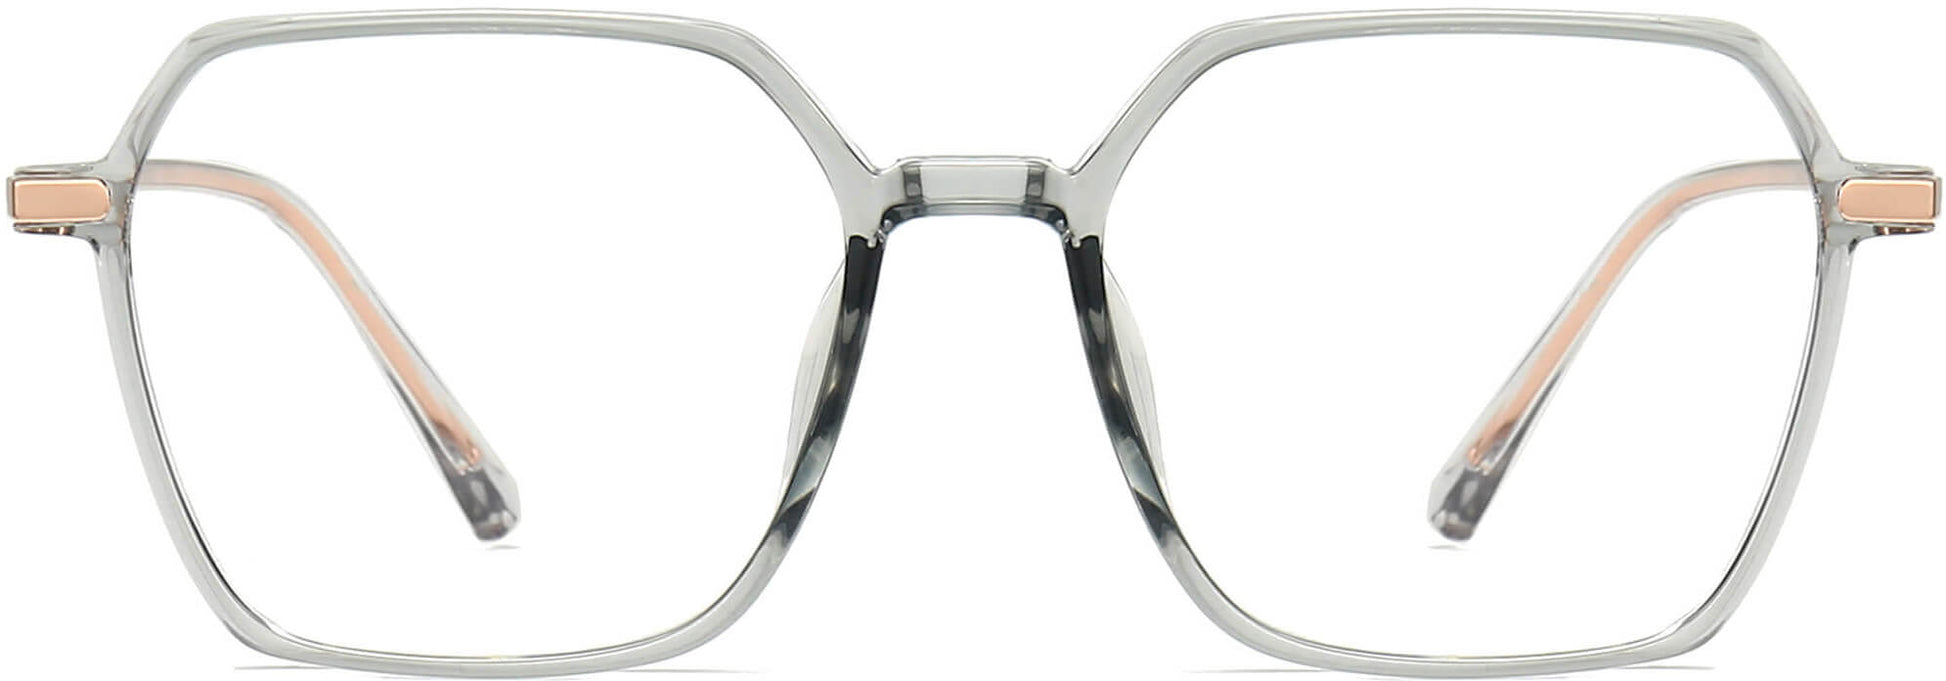 Sylvia Geometric Gray Eyeglasses from ANRRI, front view